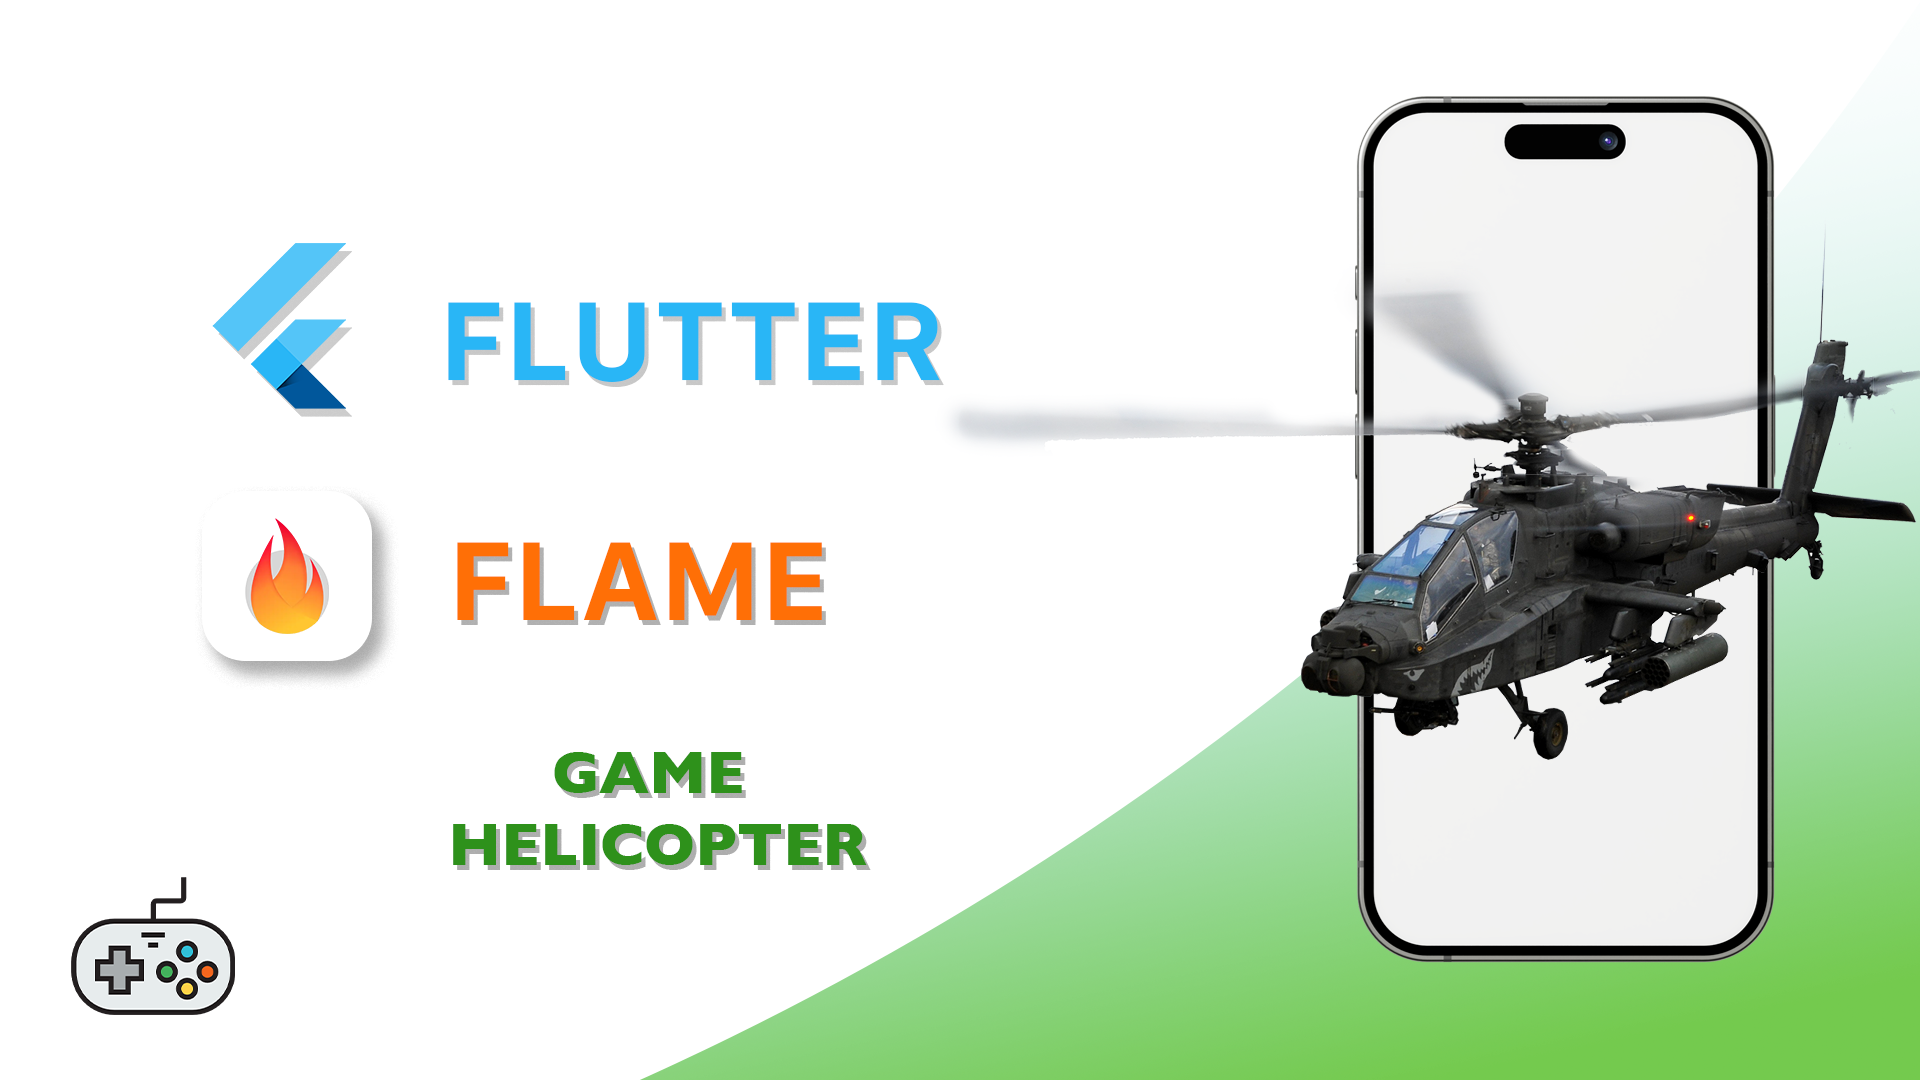 Flutter Flame. Game Helicopter